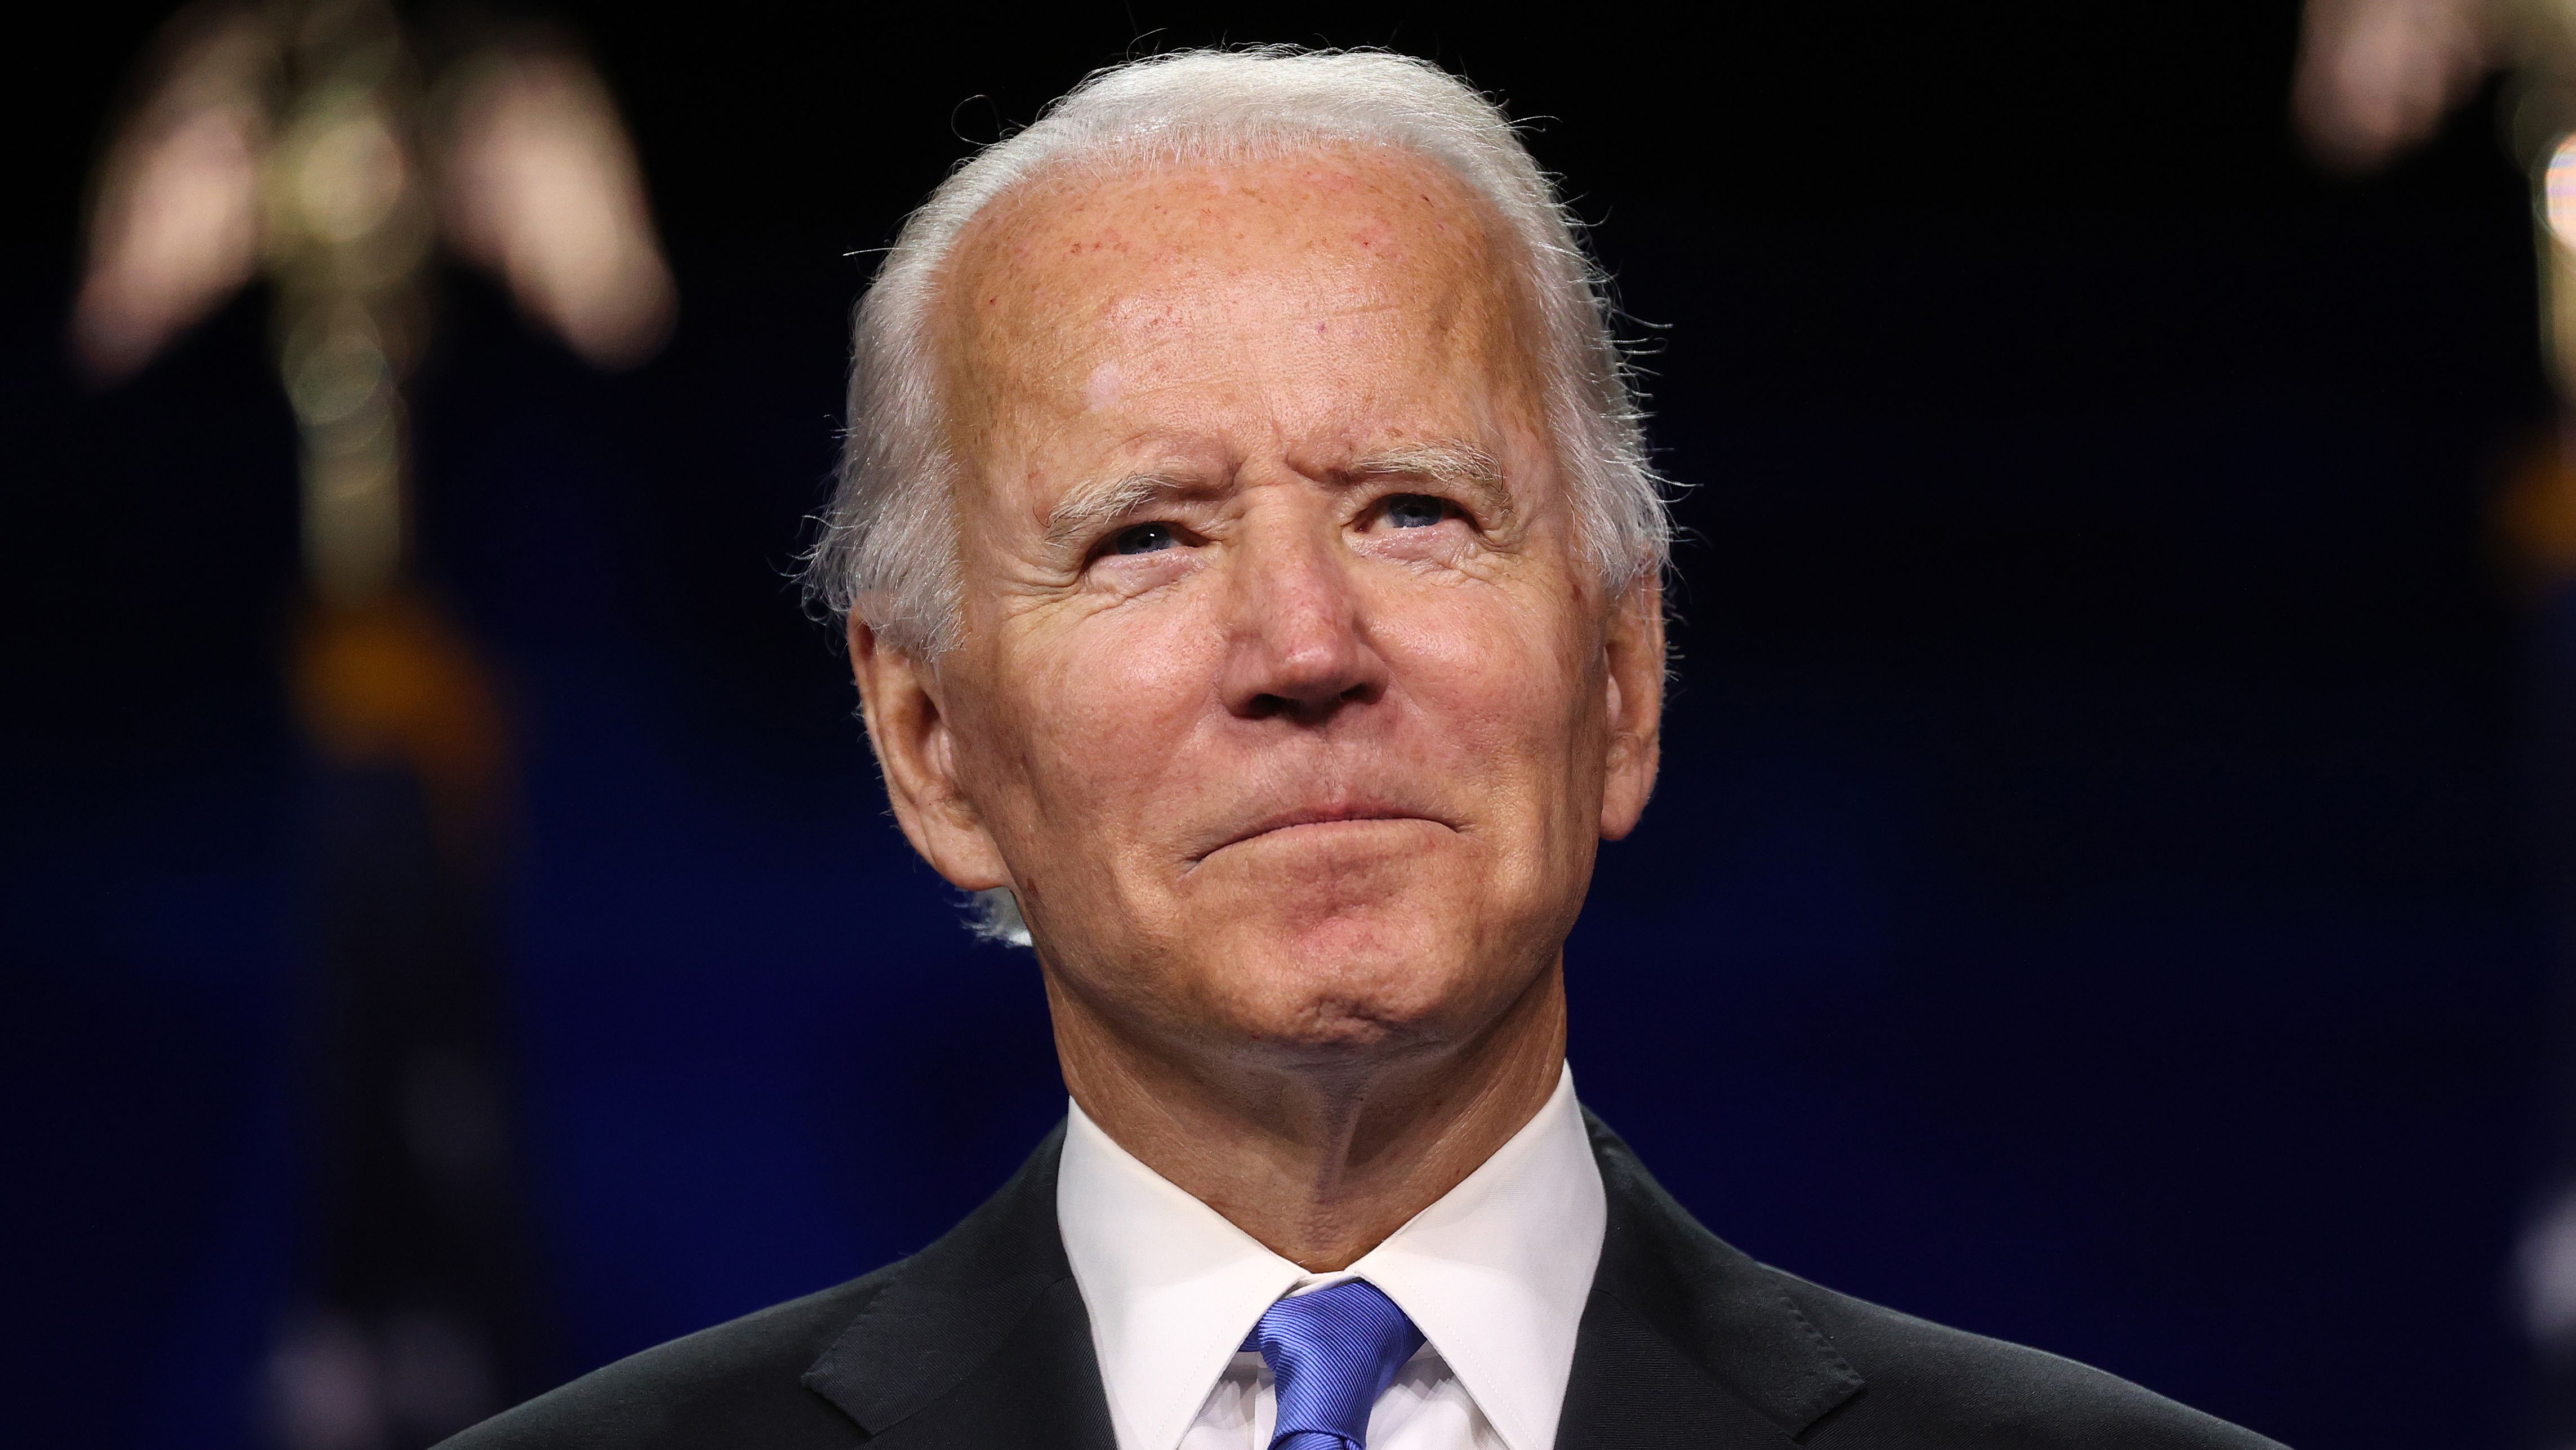 Biden campaign to air two ads during VMAs targeting young voters and